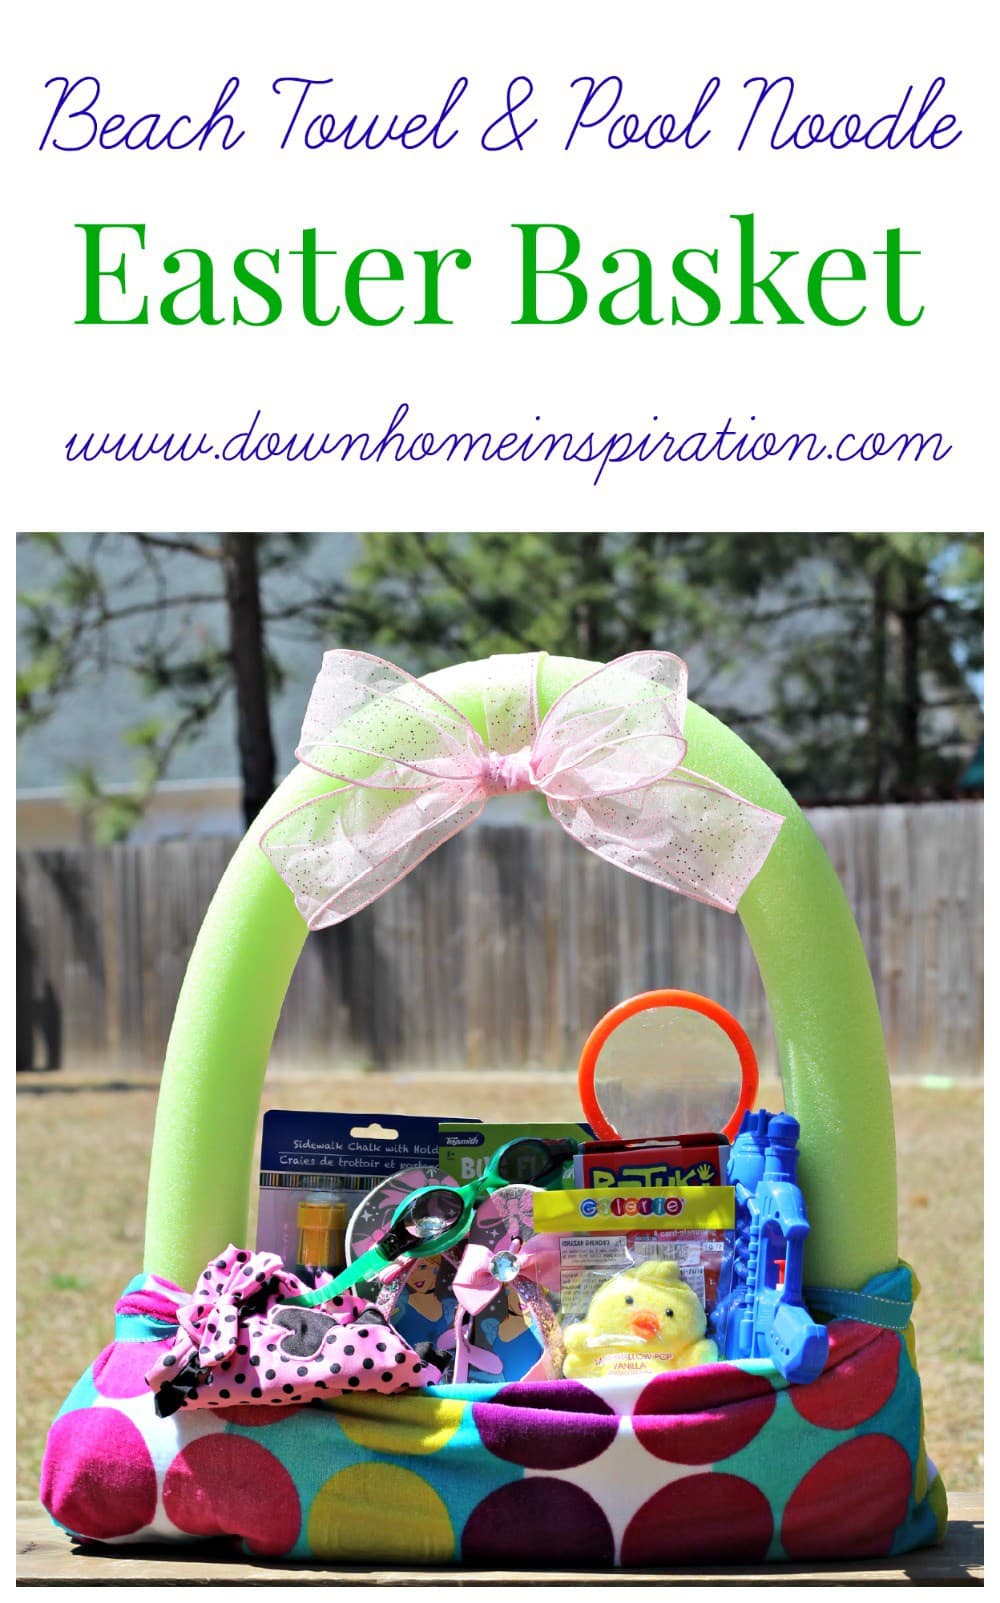 Beach Towel & Pool Noodle Basket...these are the BEST Easter Basket Ideas!